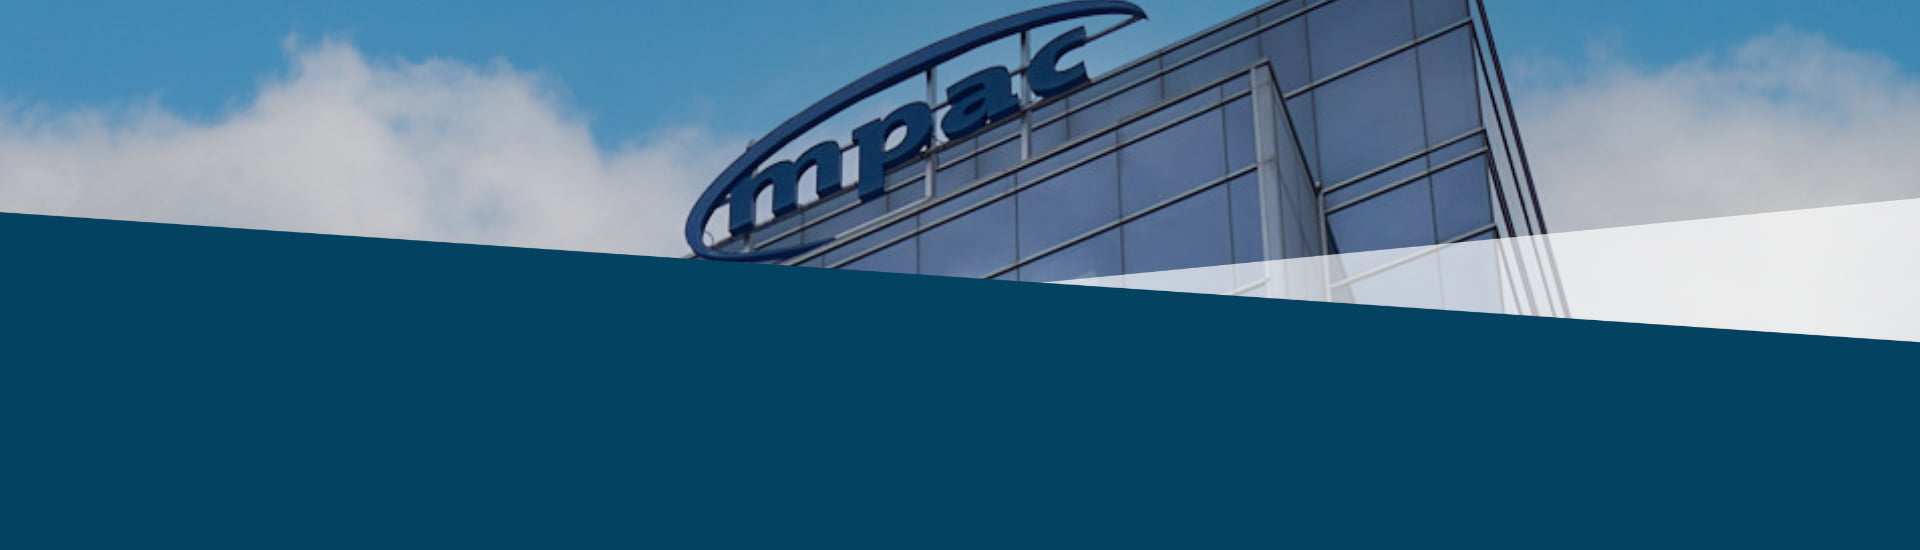 MPAC’s Commitment to Getting it Right